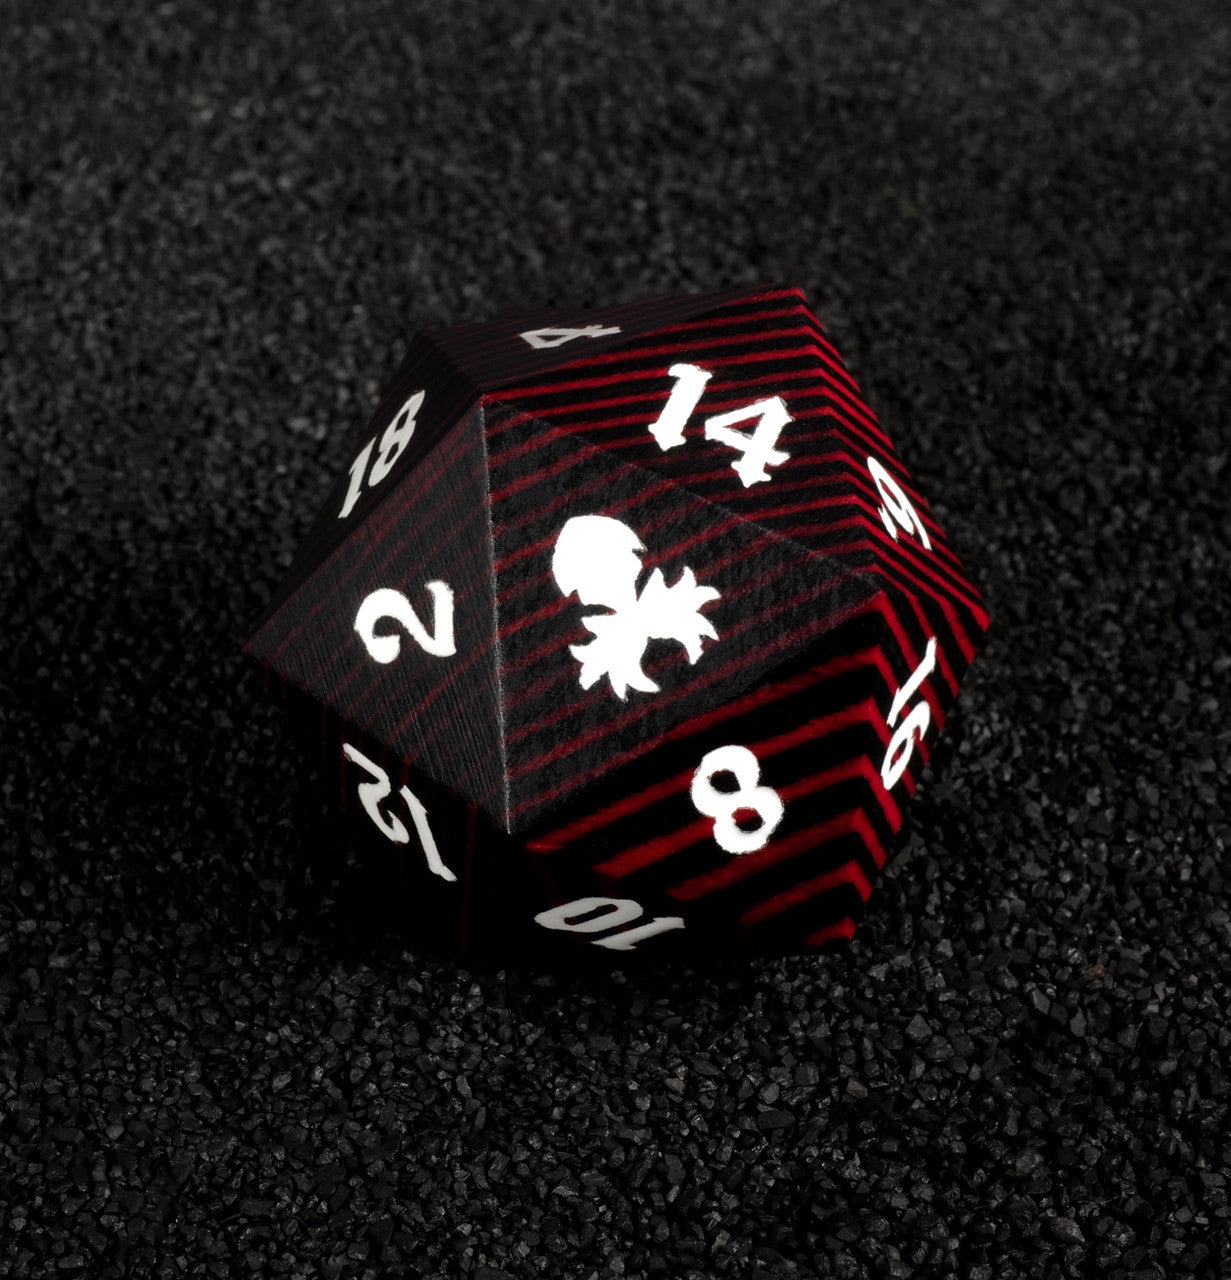 Black and Red 30mm Wooden D20